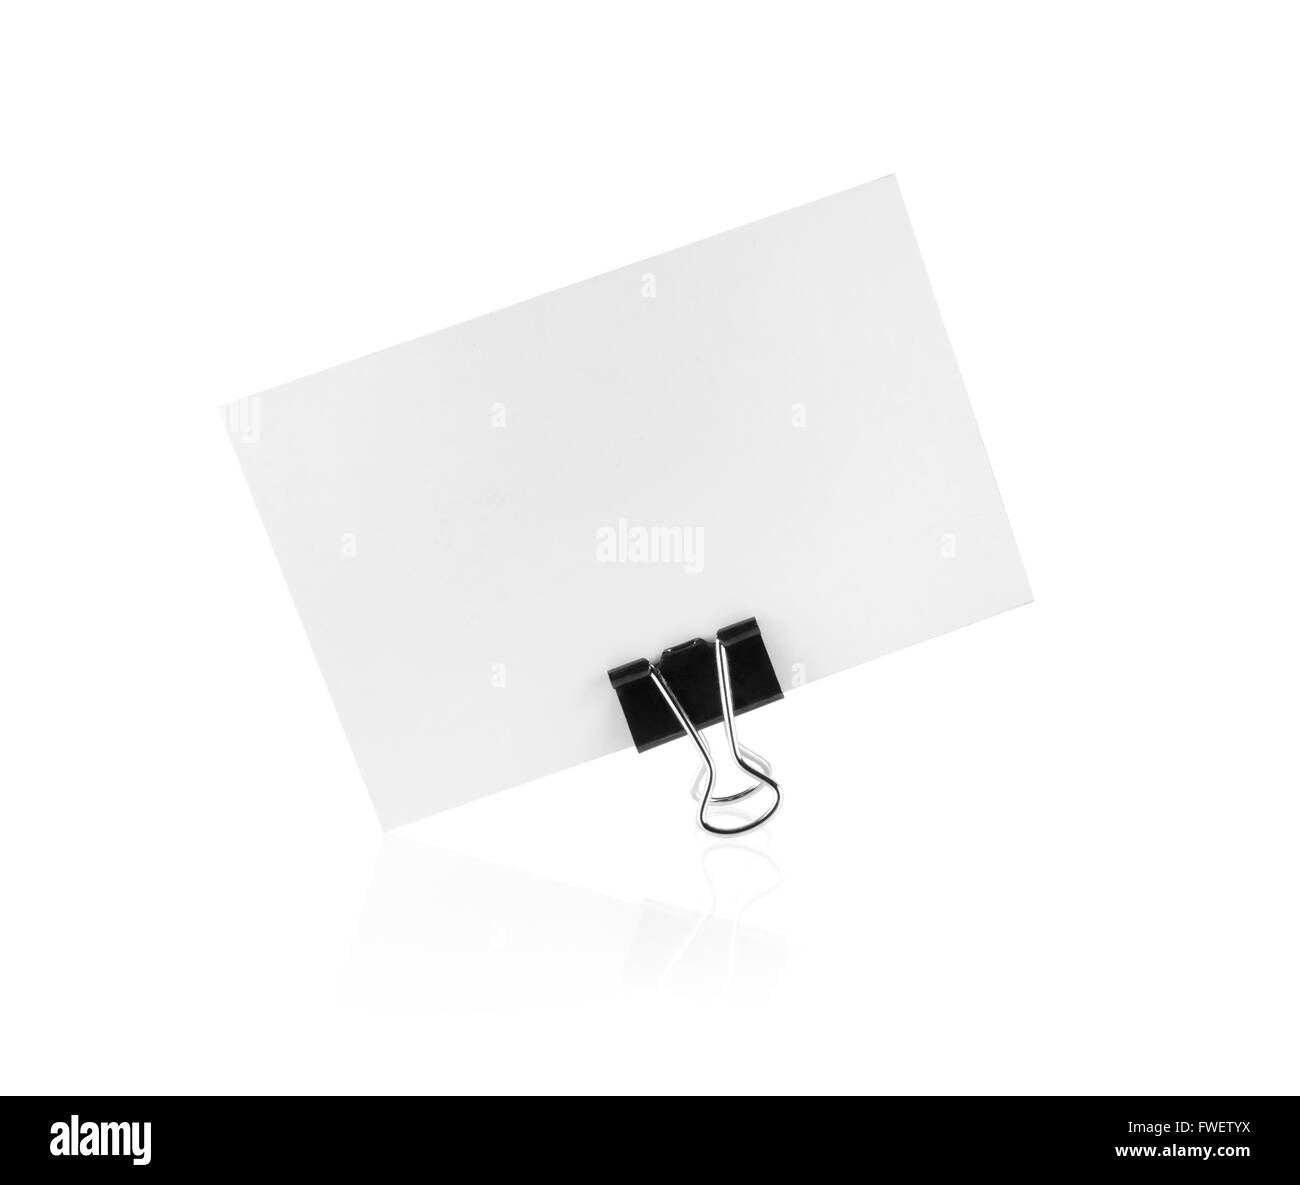 Blank business card with reflection. Isolated with clipping path on white background. Template for branding identity. Stock Photo